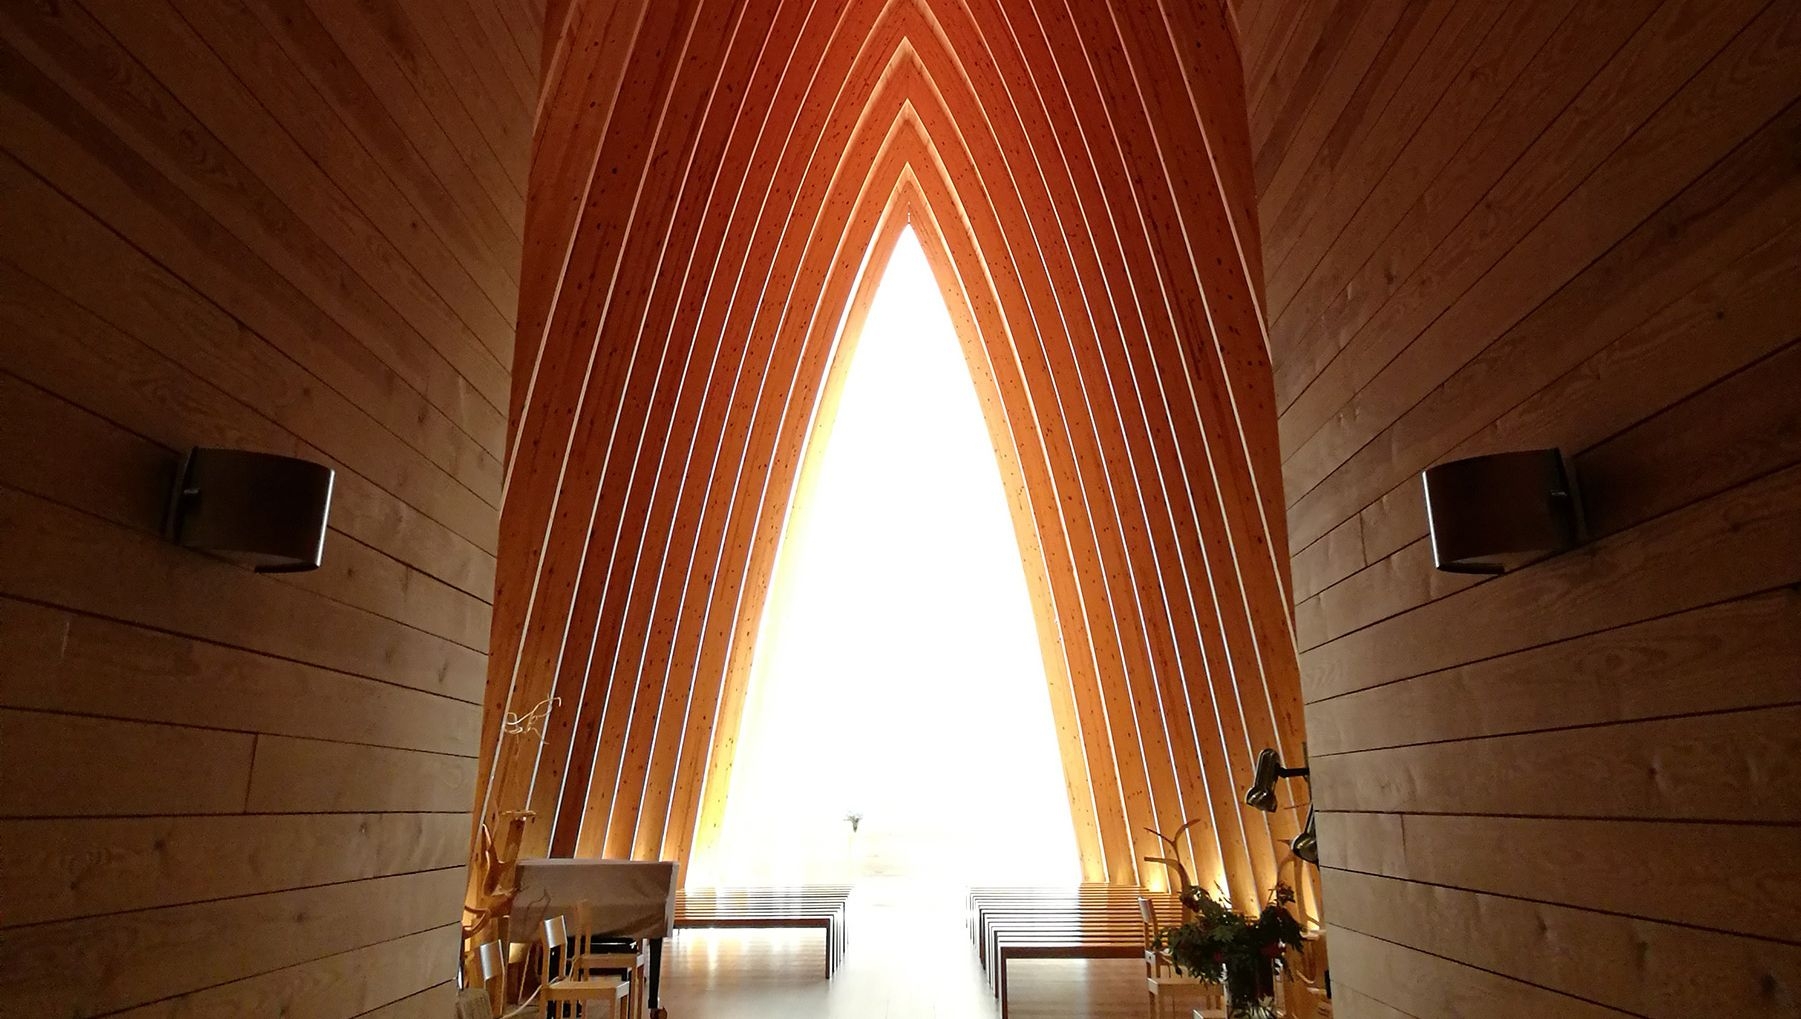 The glowing interior of St Henry's Ecumenical Art Chapel.